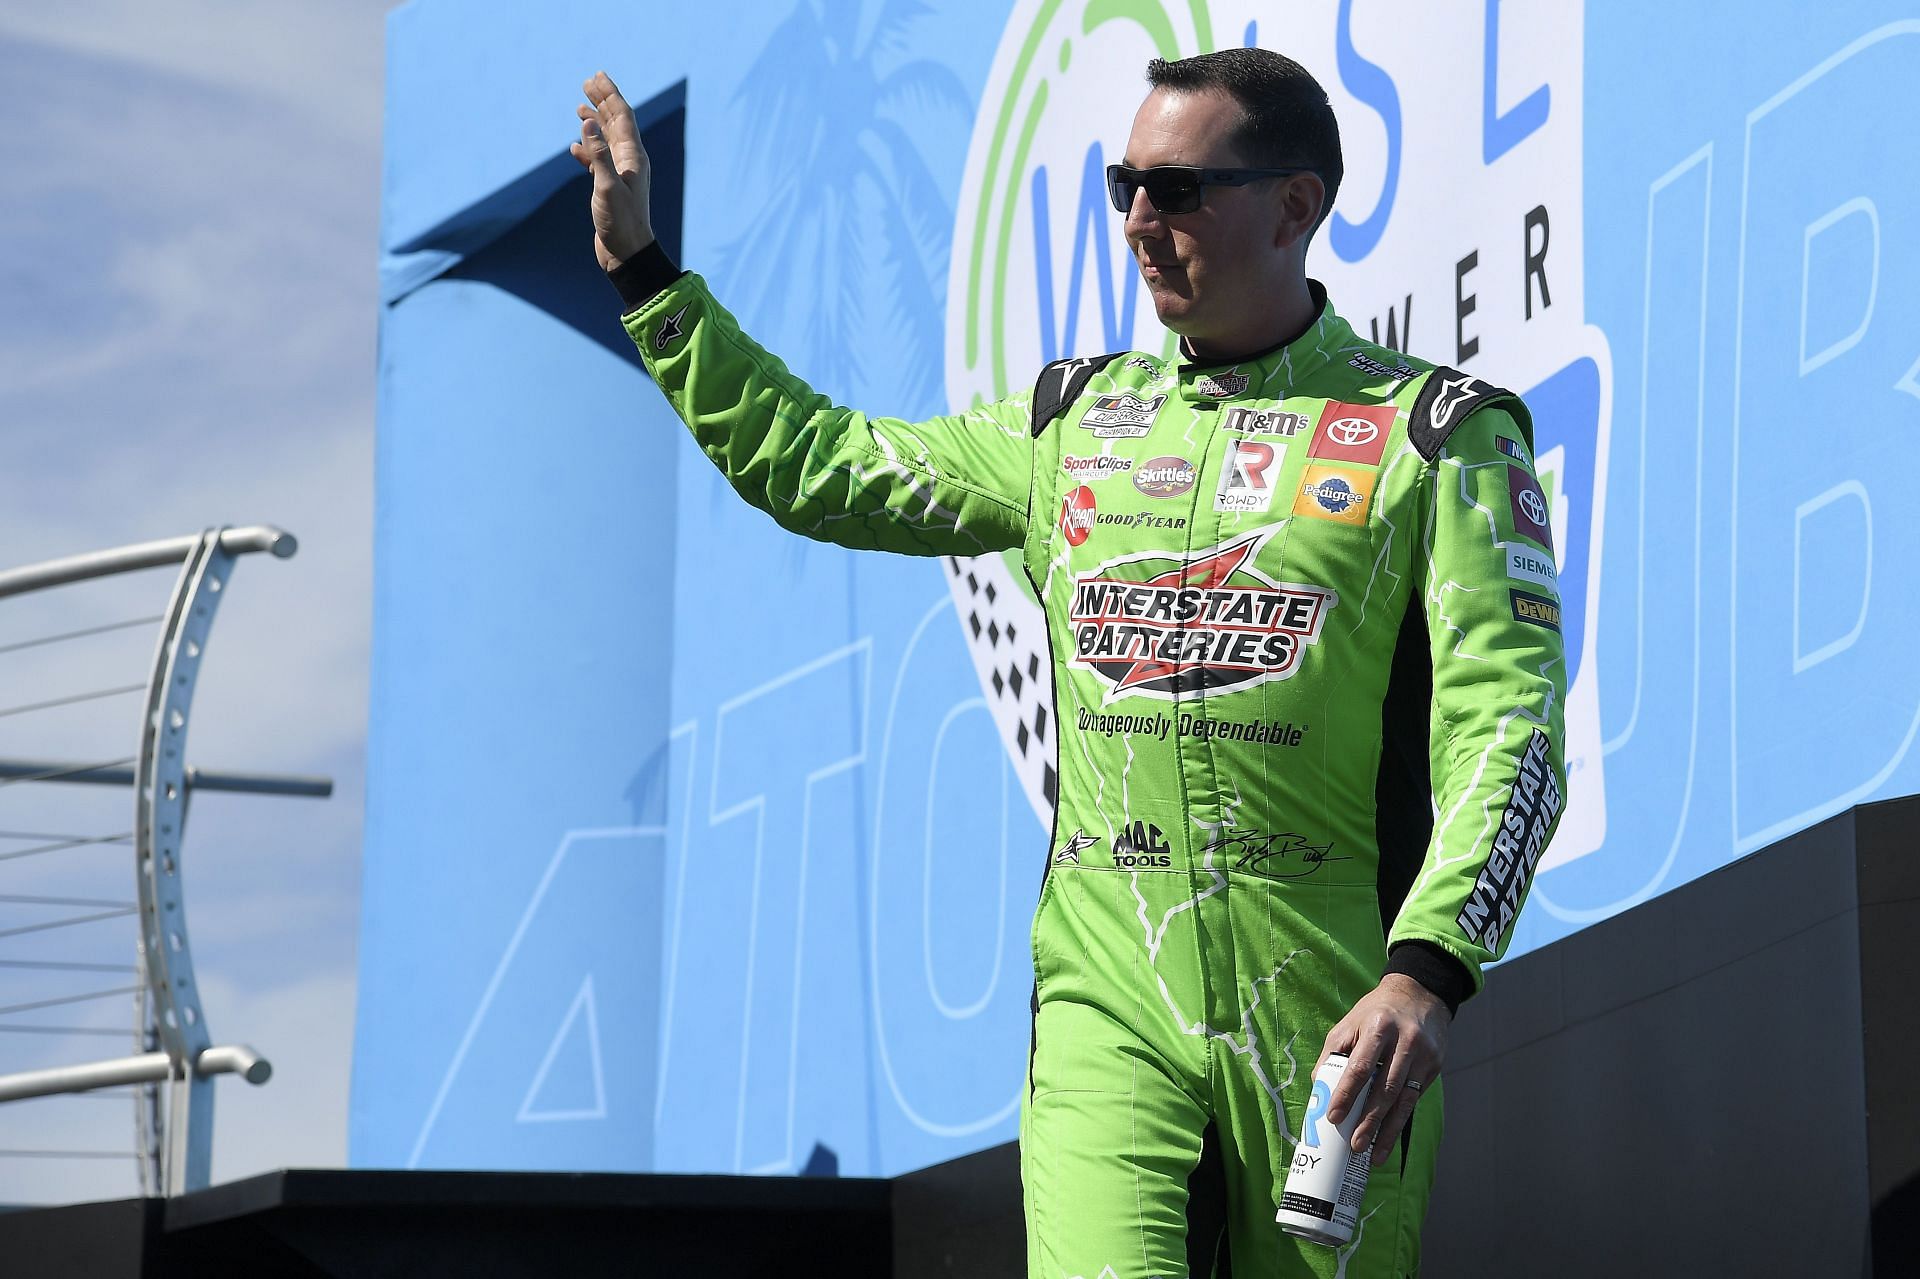 Kyle Busch during driver intros before the 2022 NASCAR Cup Series Wise Power 400 at Auto Club Speedway in Fontana, California (Photo by Kevork Djansezian/Getty Images)